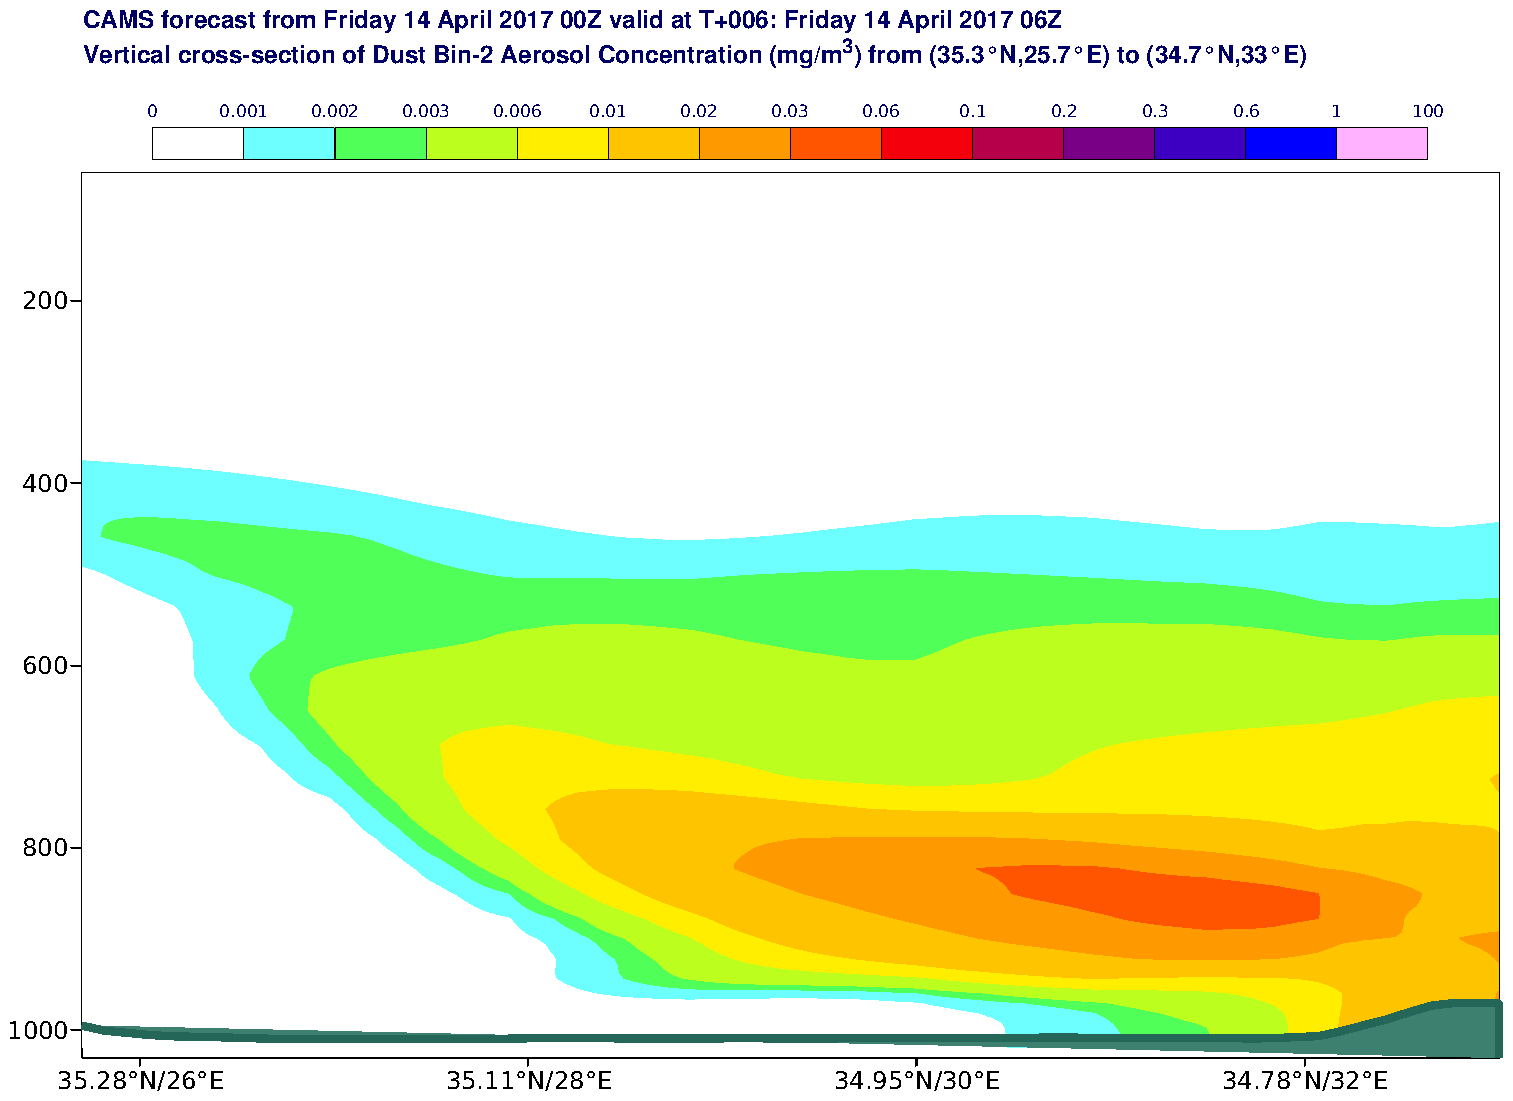 Vertical cross-section of Dust Bin-2 Aerosol Concentration (mg/m3) valid at T6 - 2017-04-14 06:00